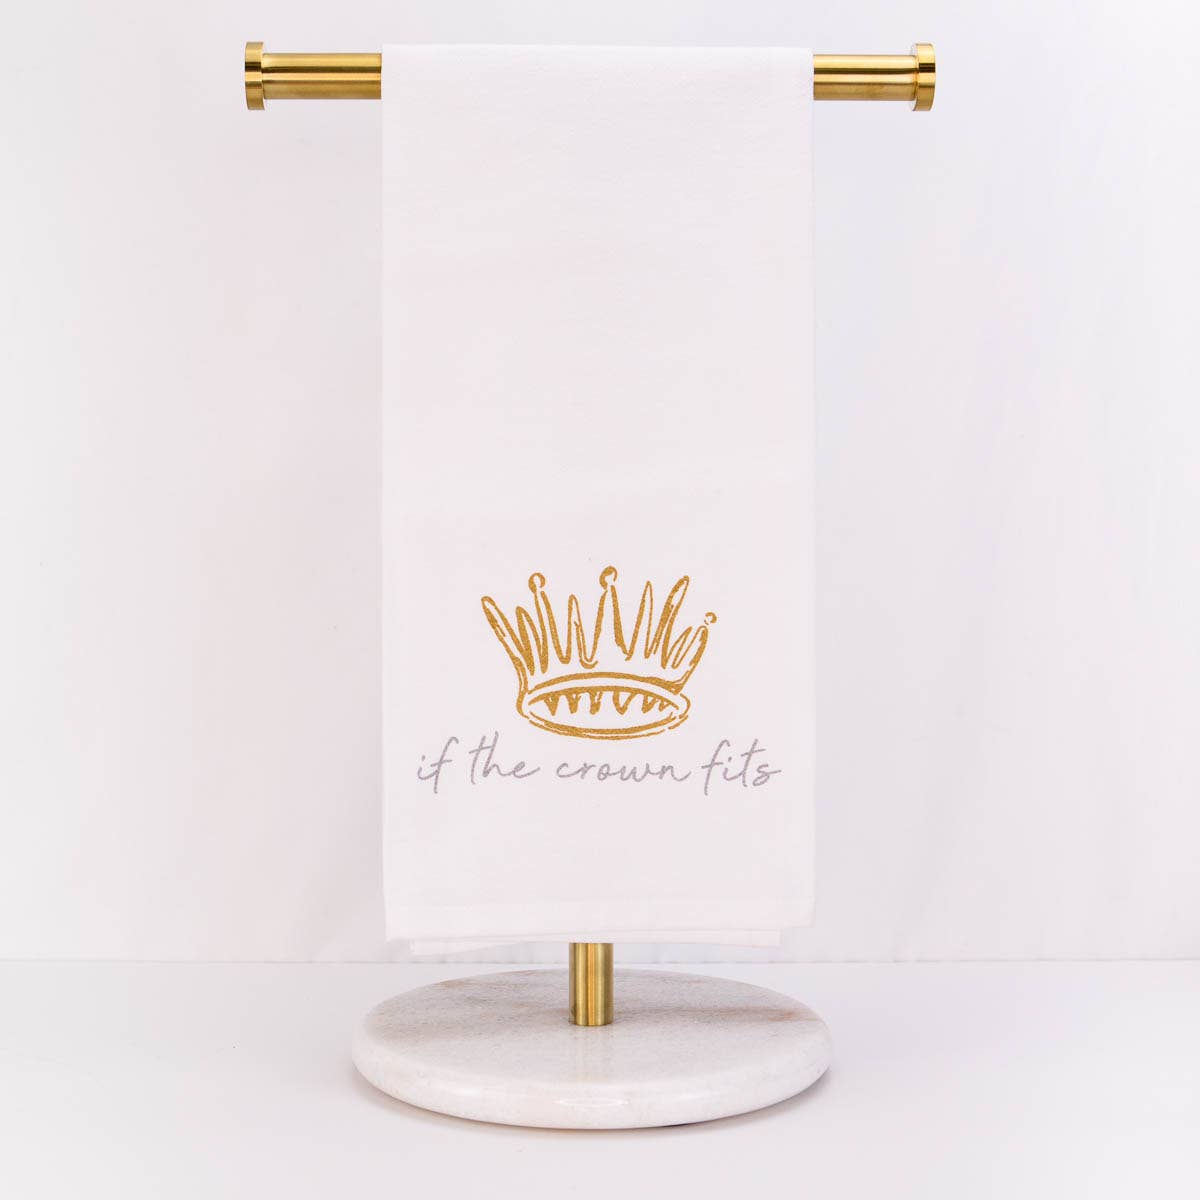 If The Crown Fits Flour Sack Hand Towel   White/Light Gold   20x28